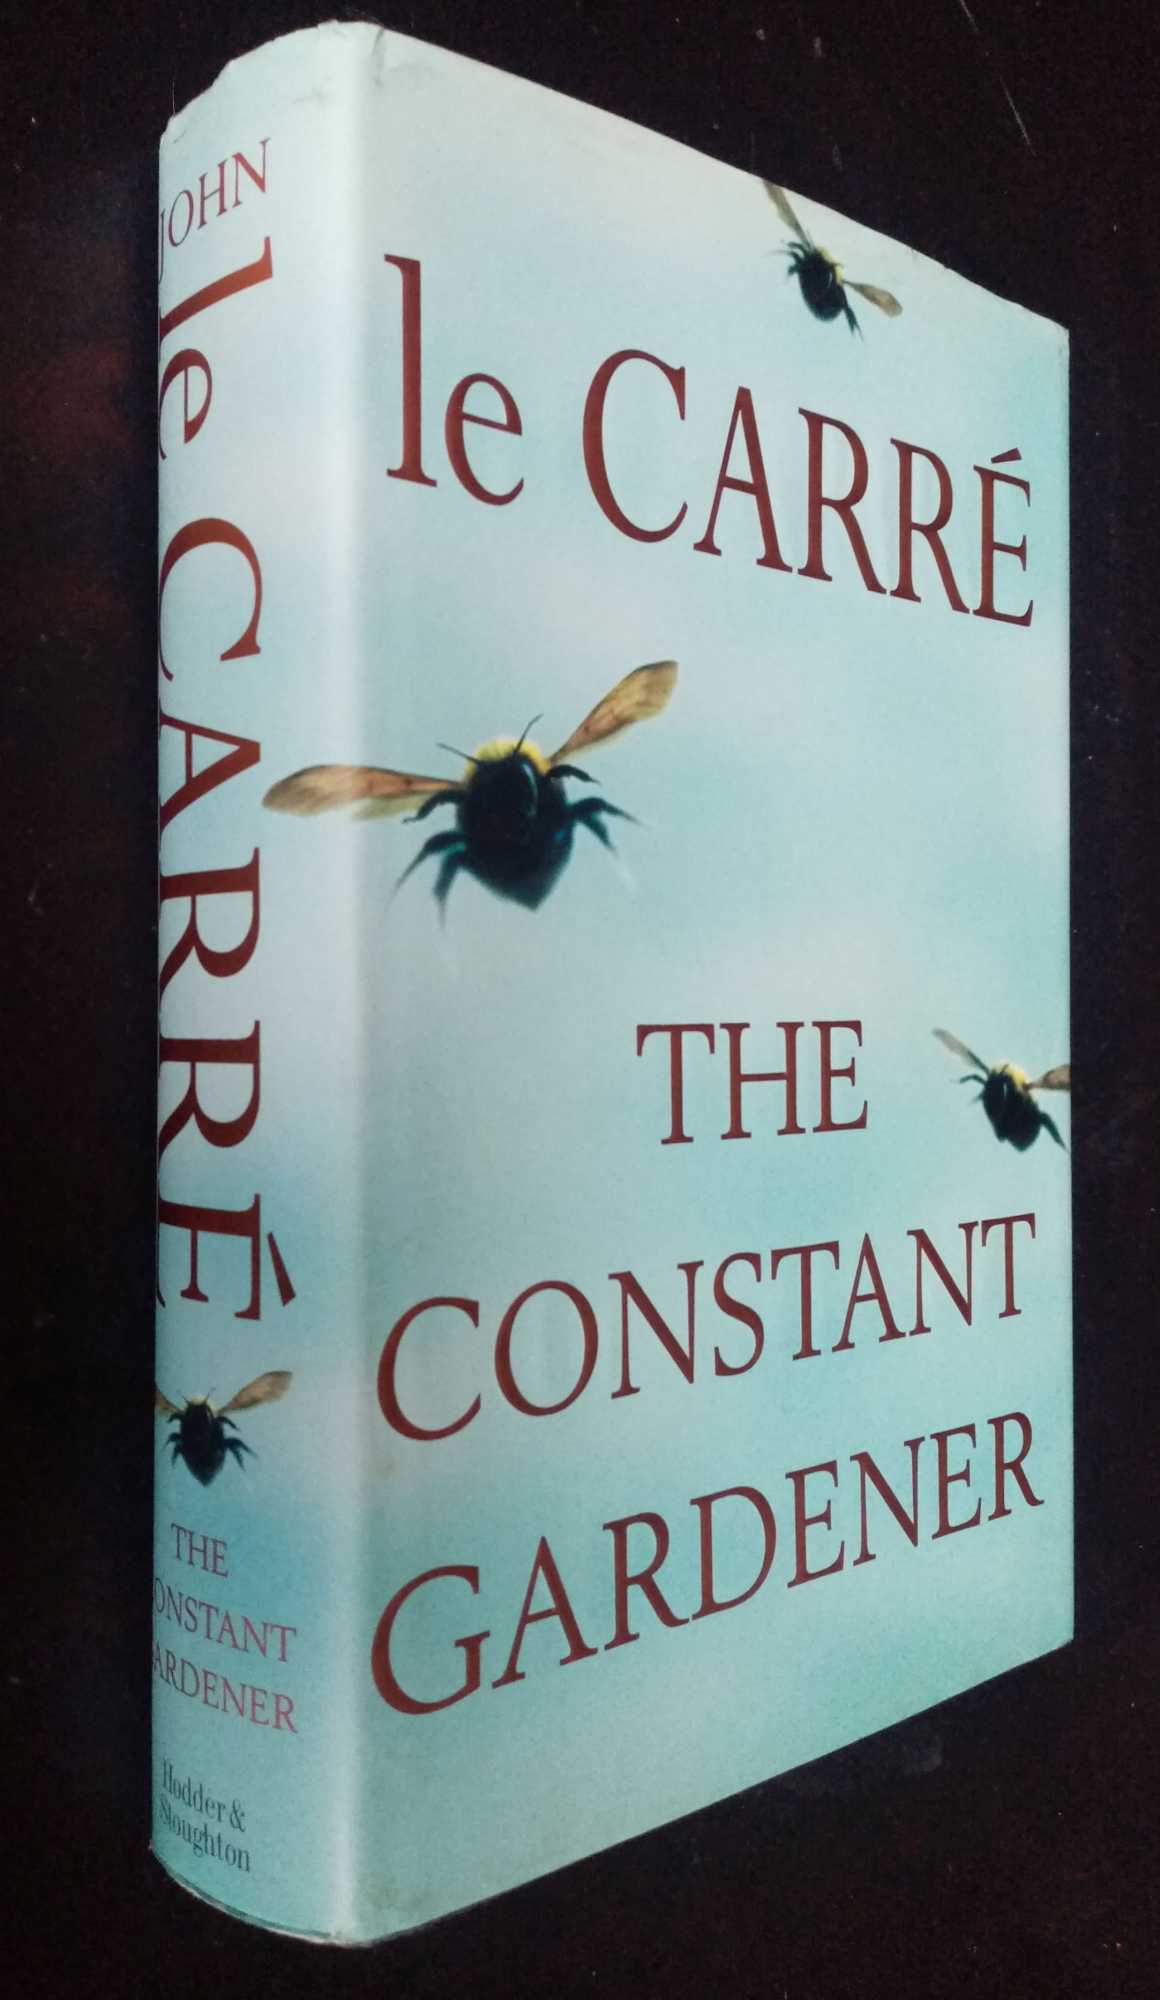 John le Carre - The Constant Gardener     SIGNED